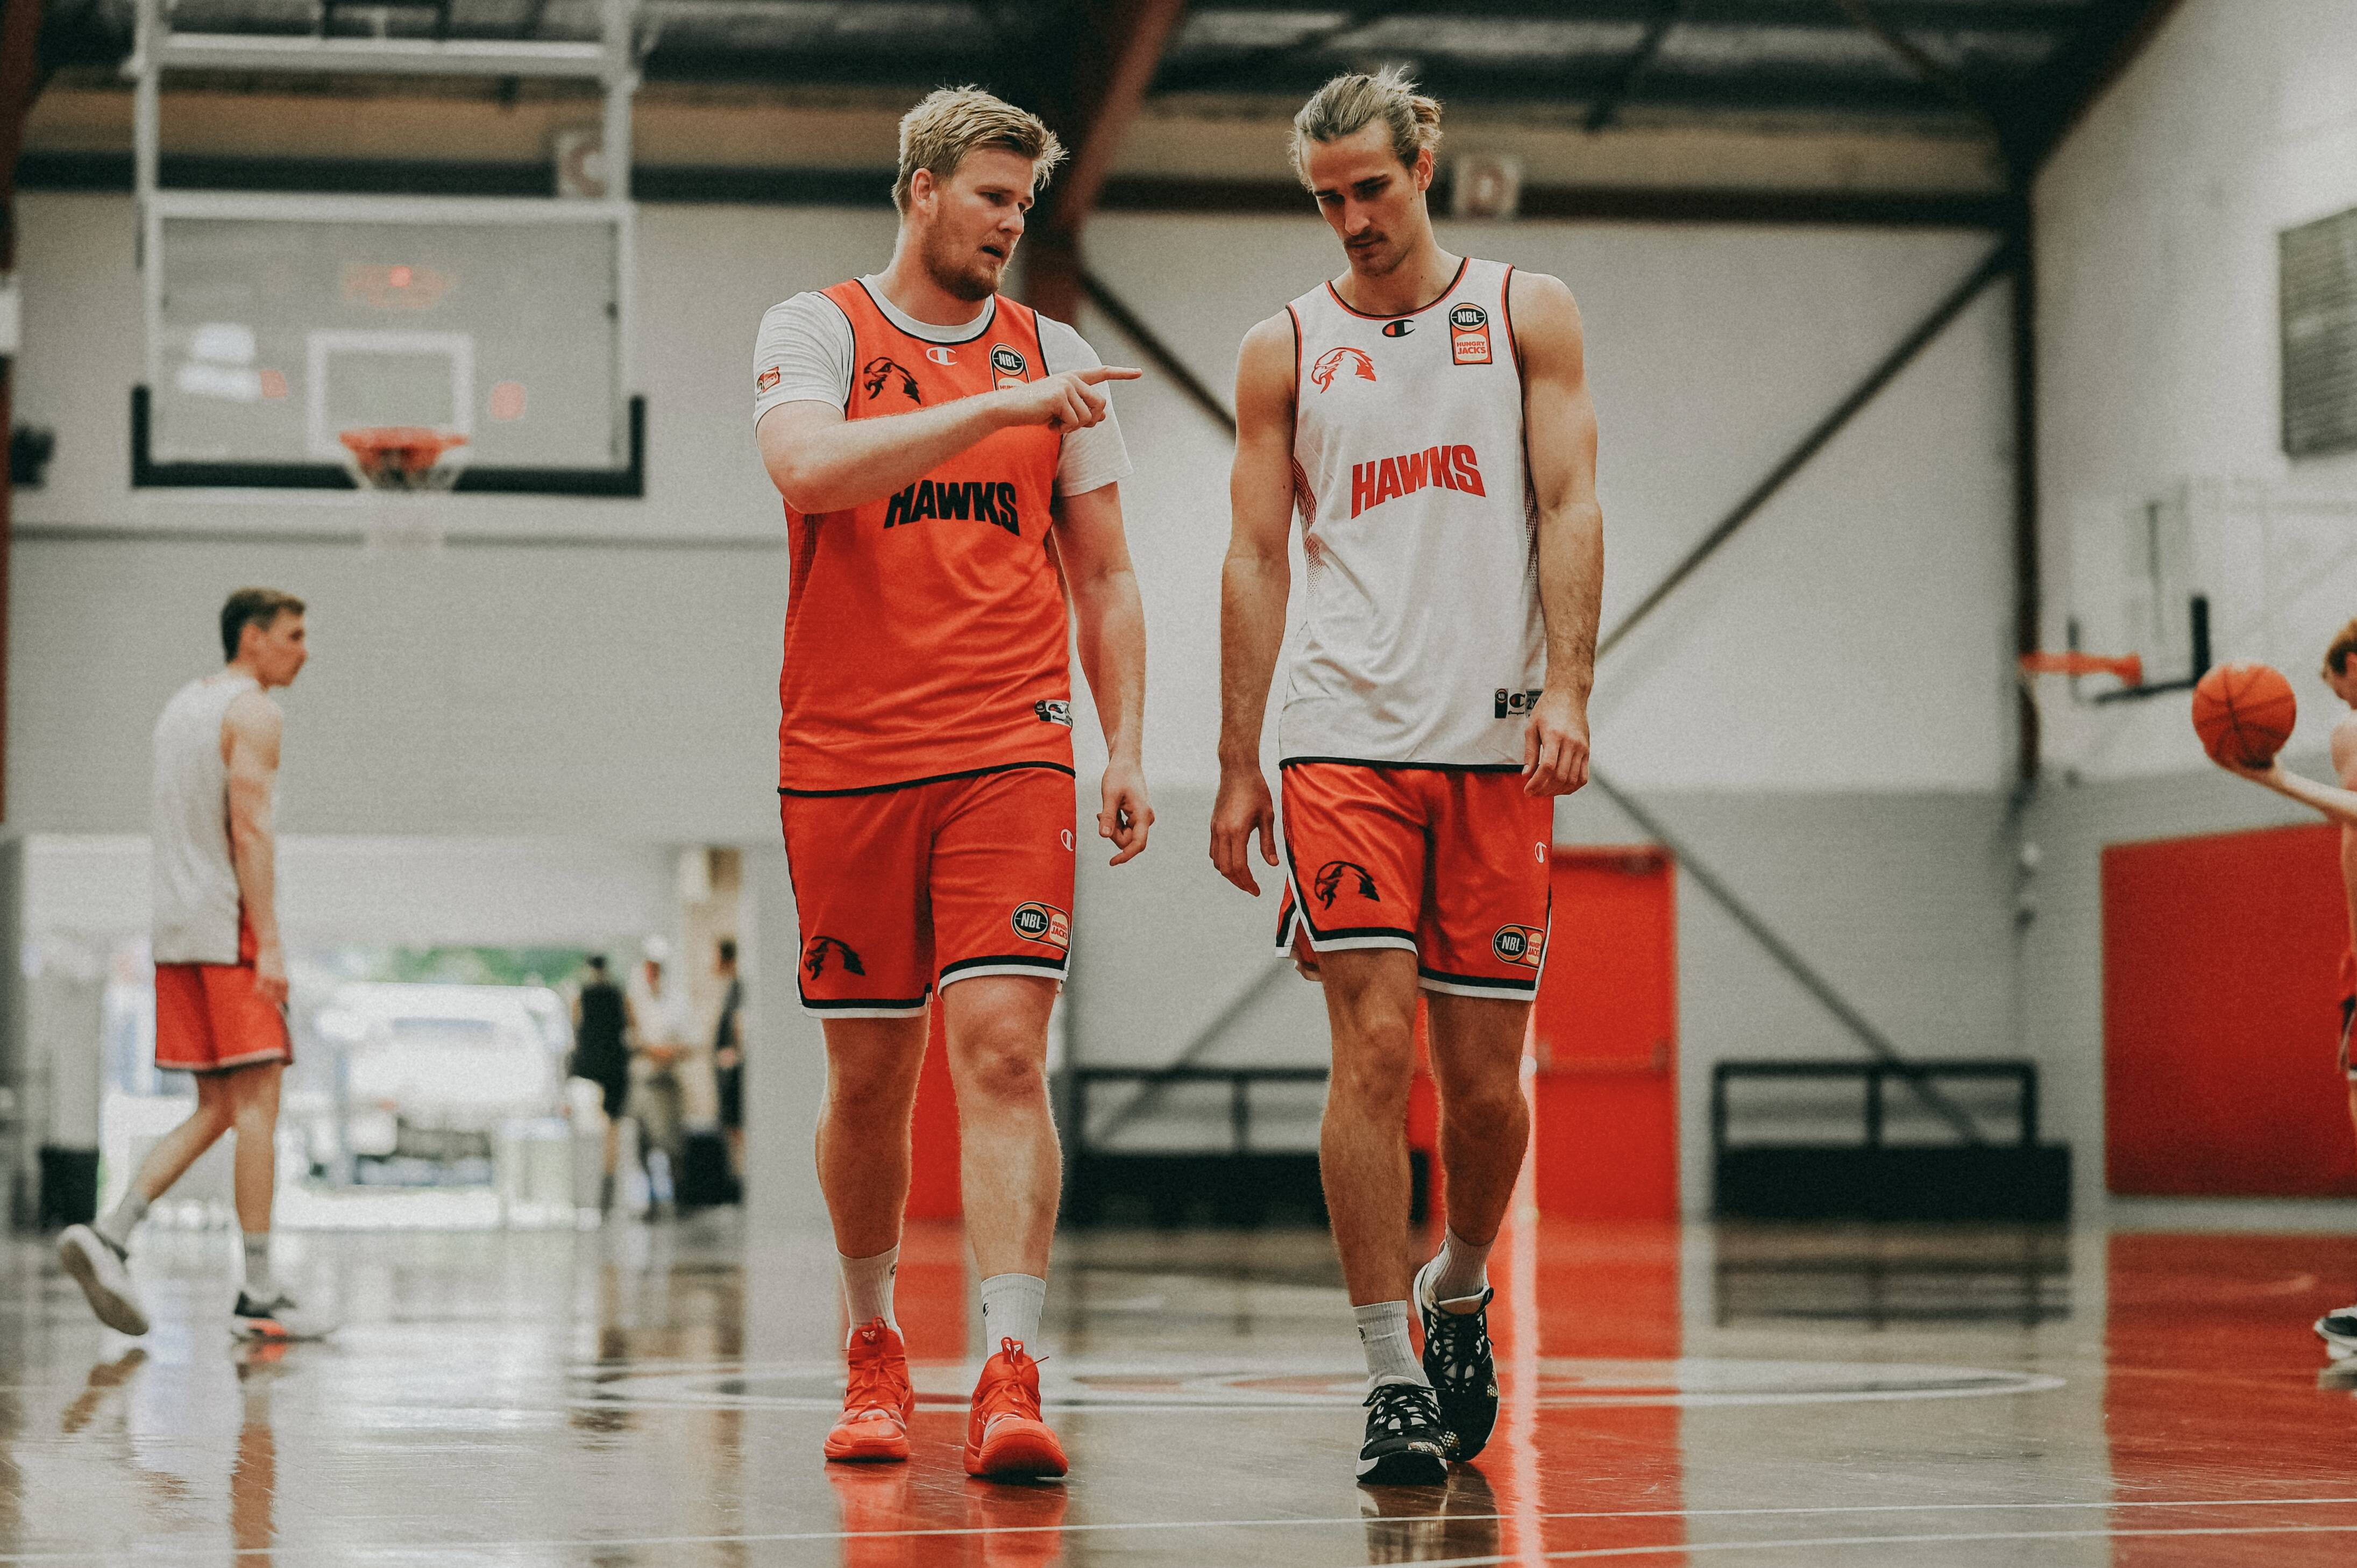 Blanchfield returns to Wollongong after inking deal with Hawks